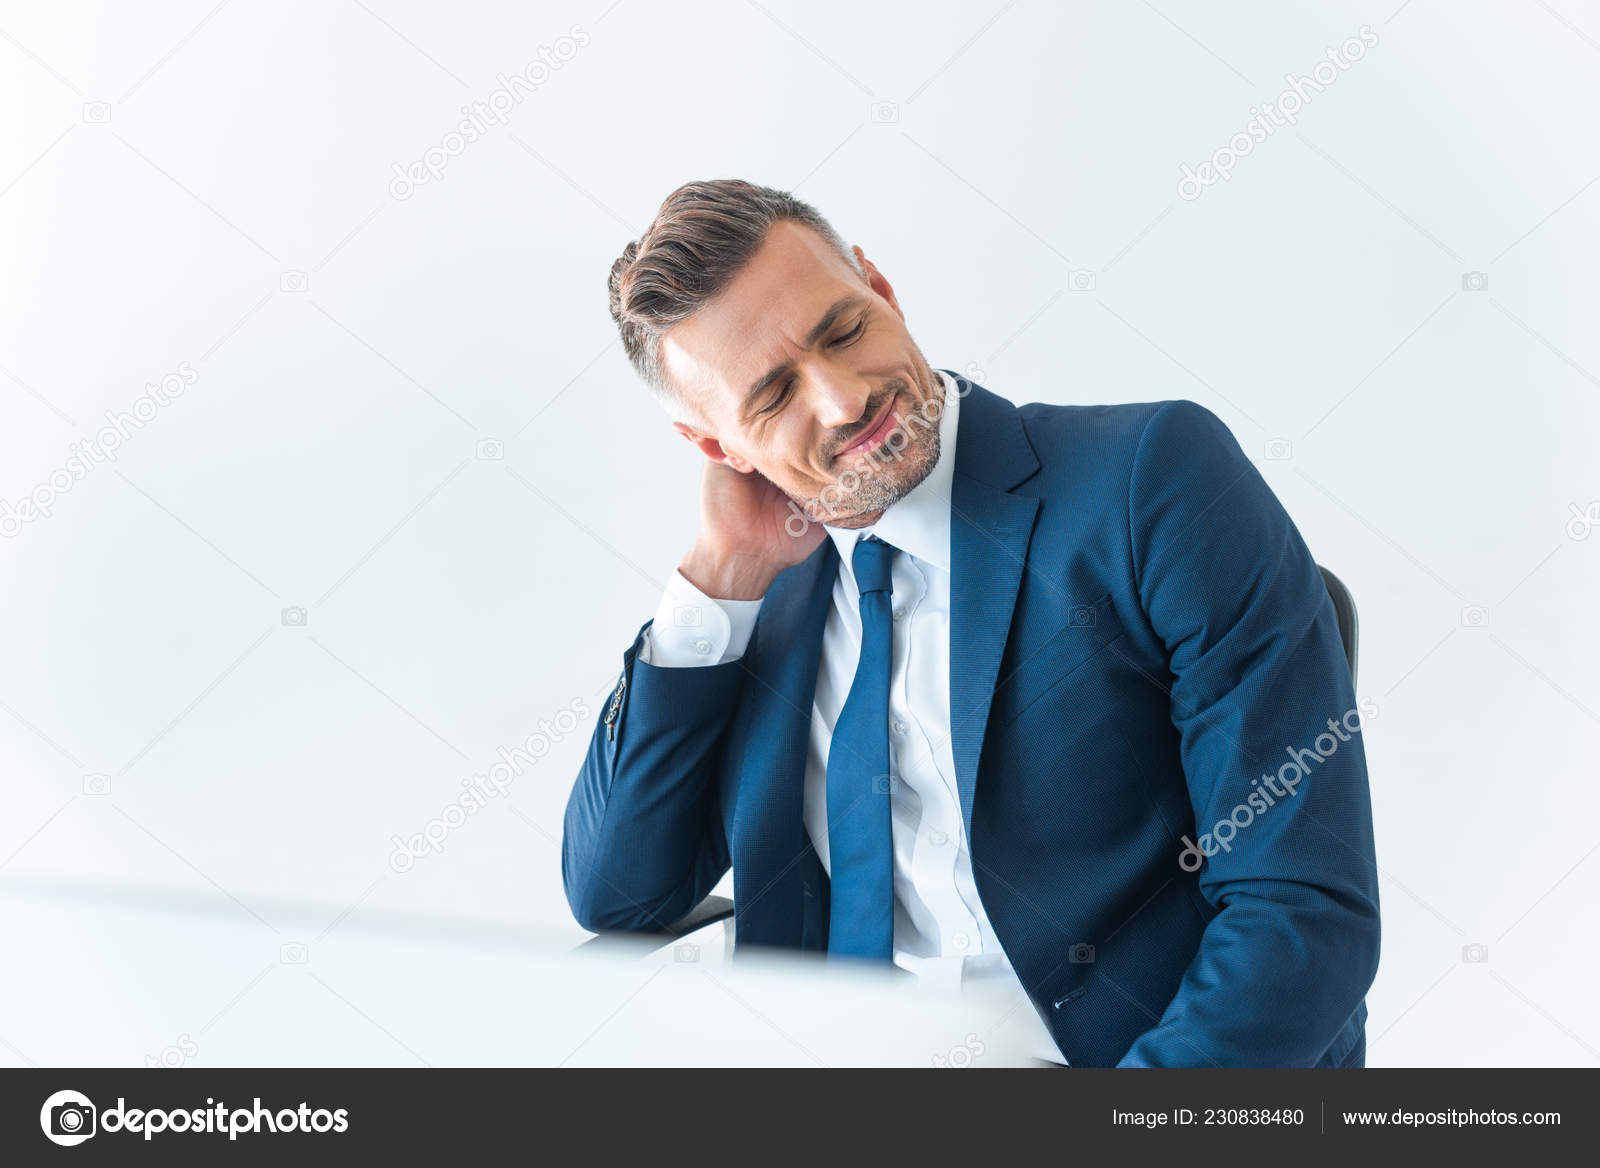 Mon personnage principal reste flou et intangible. - Page 2 Depositphotos_230838480-stock-photo-cheerful-tired-businessman-touching-neck